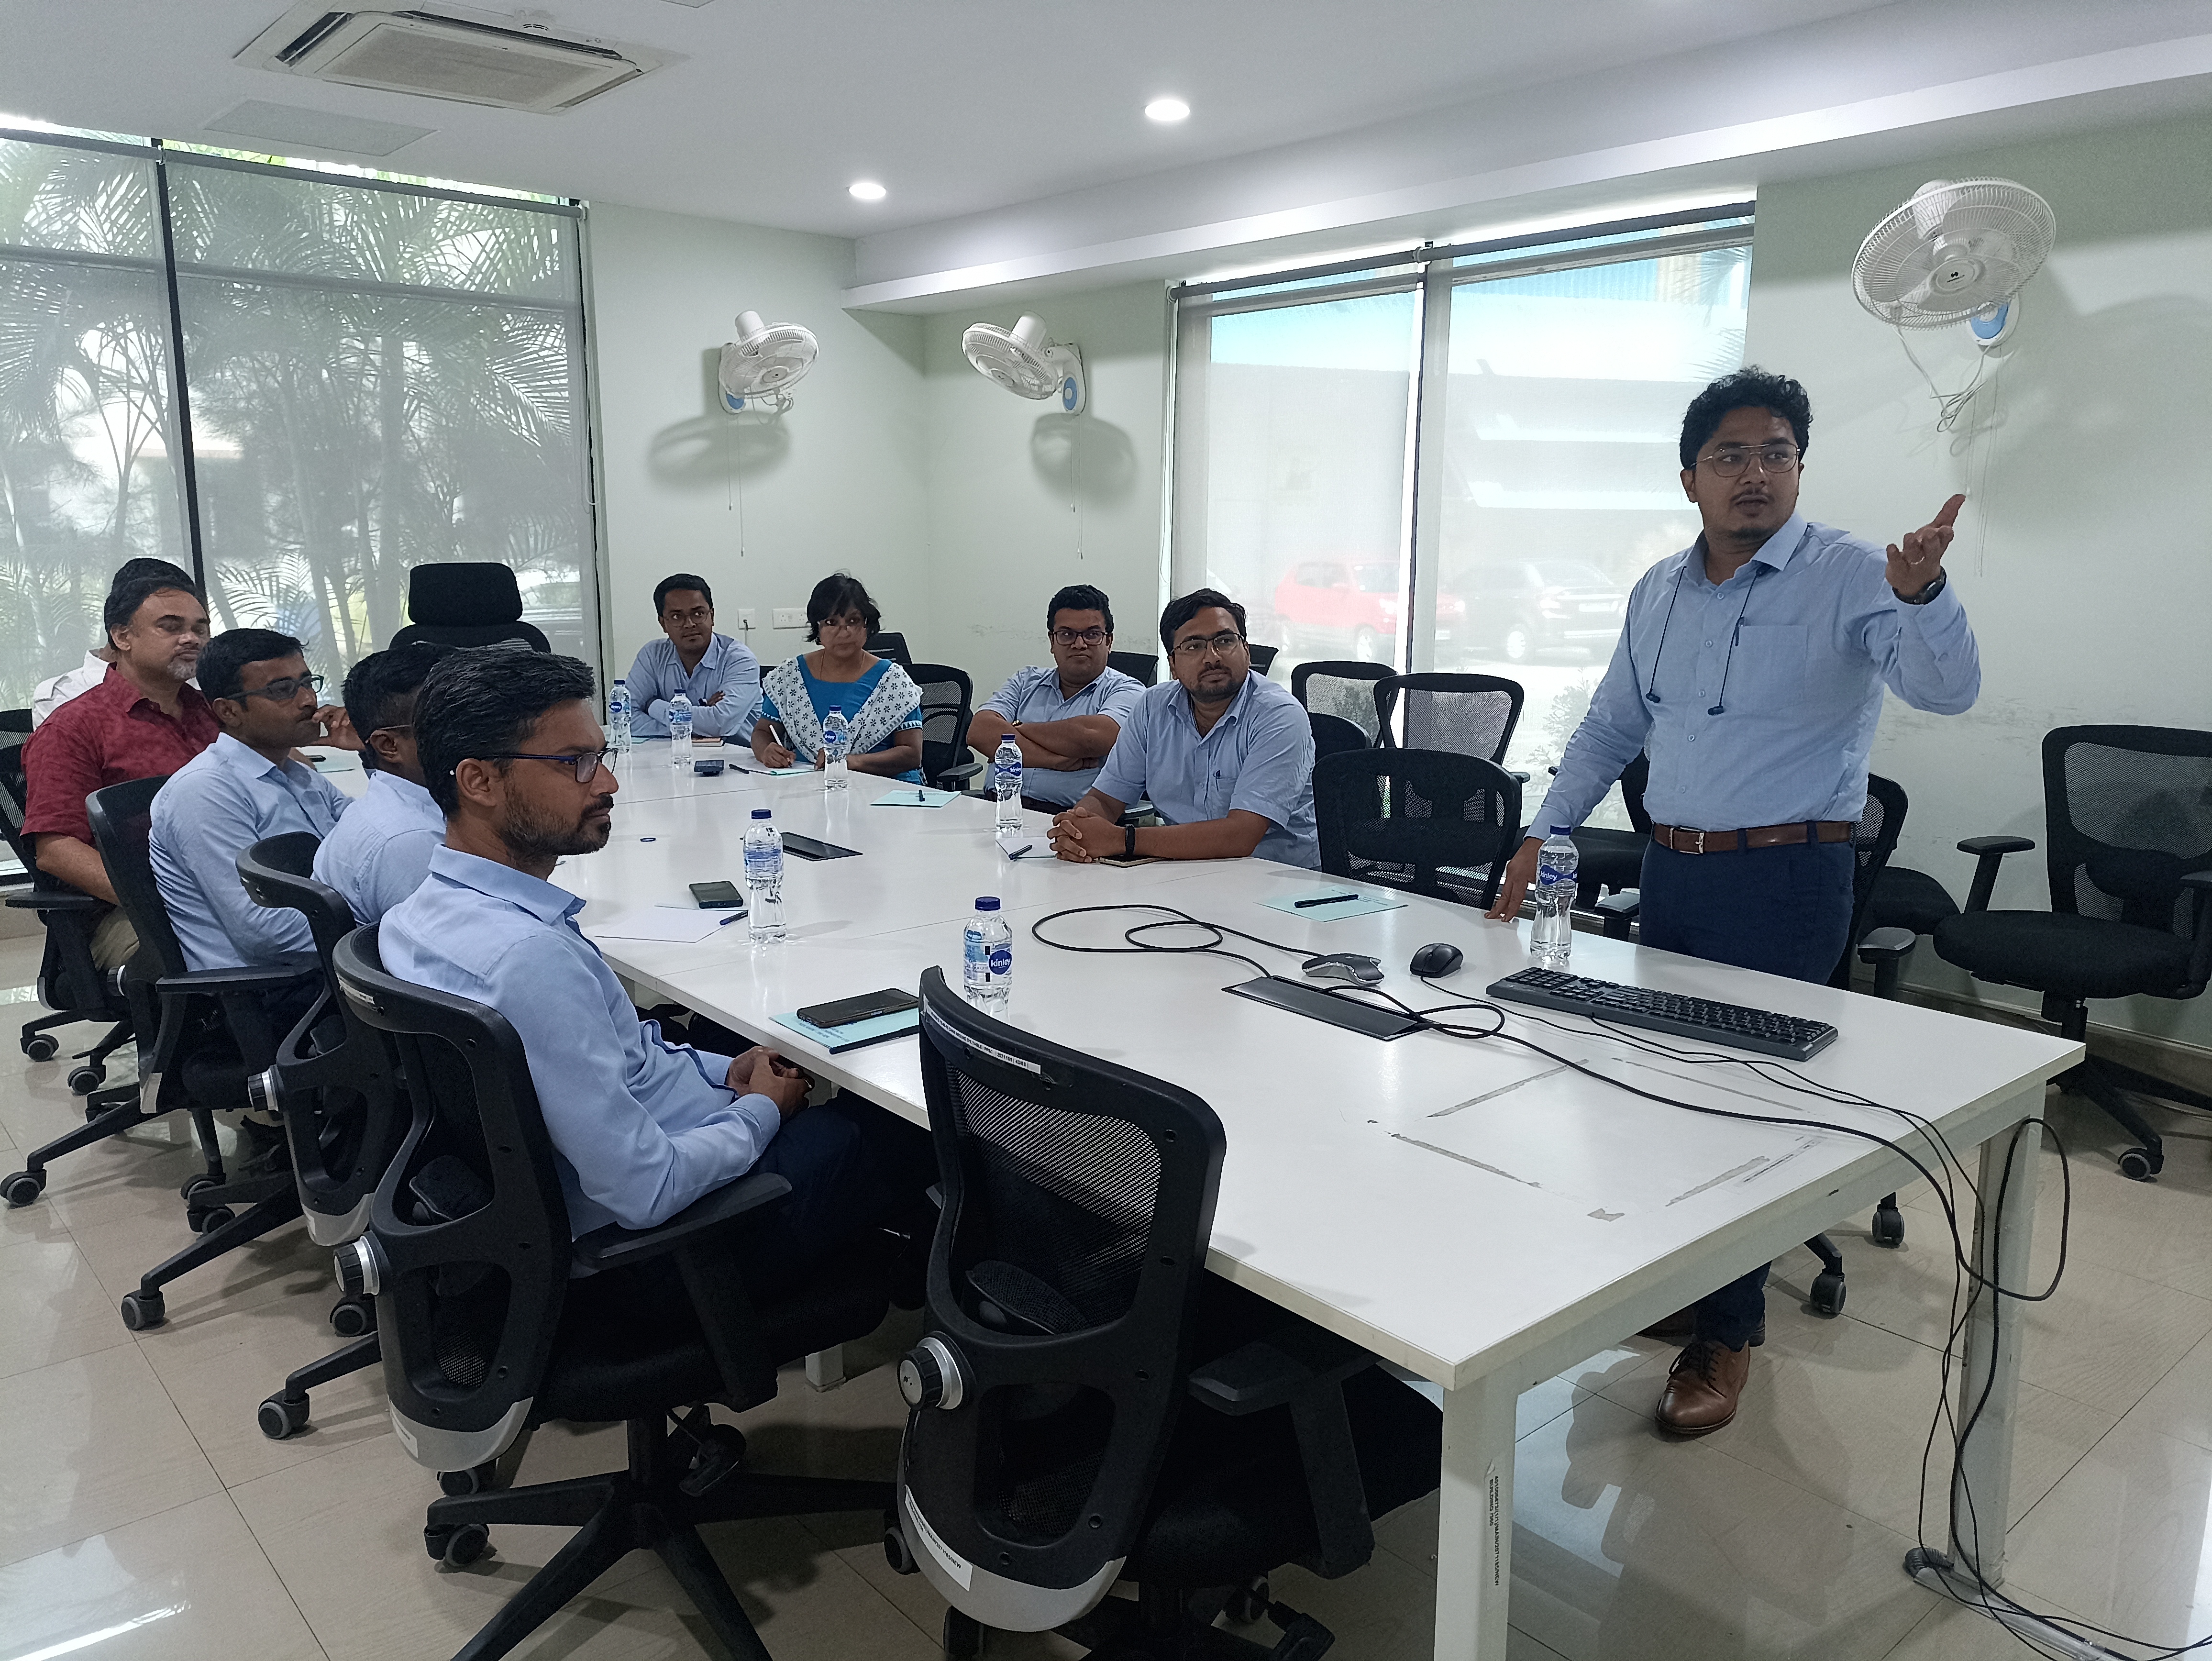 Awareness Session on Project Management for Employees on 13 Jul 23